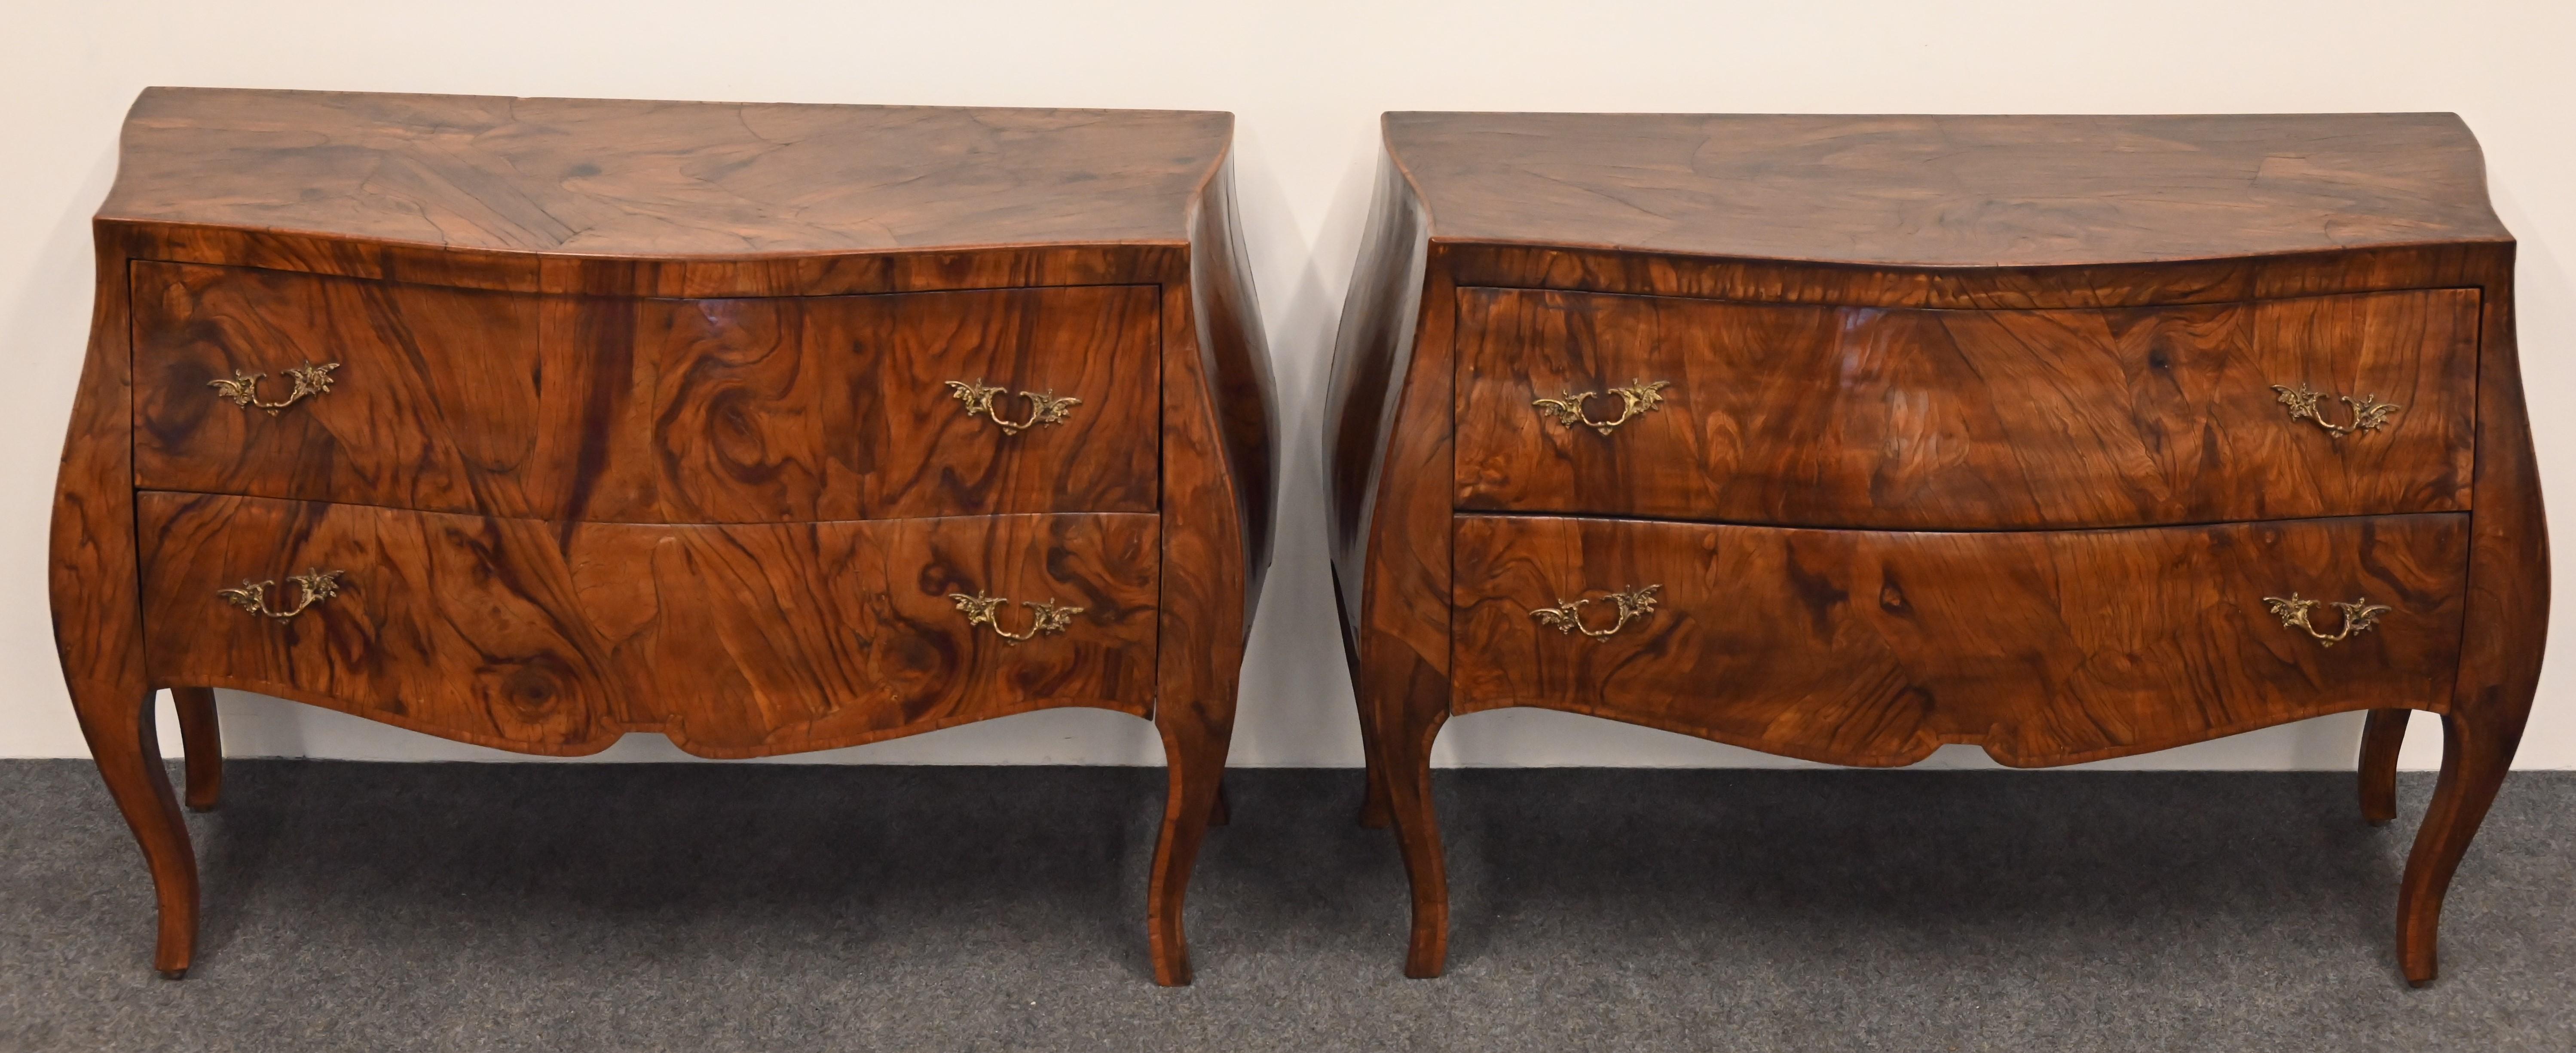 A gorgeous pair of Italian Walnut Burlwood commodes or chests. This pair of chests could be used on either side of the bed as nightstands. The large-scale commodes would look great in any interior, whether French, Italian, or Bohemian style. Great